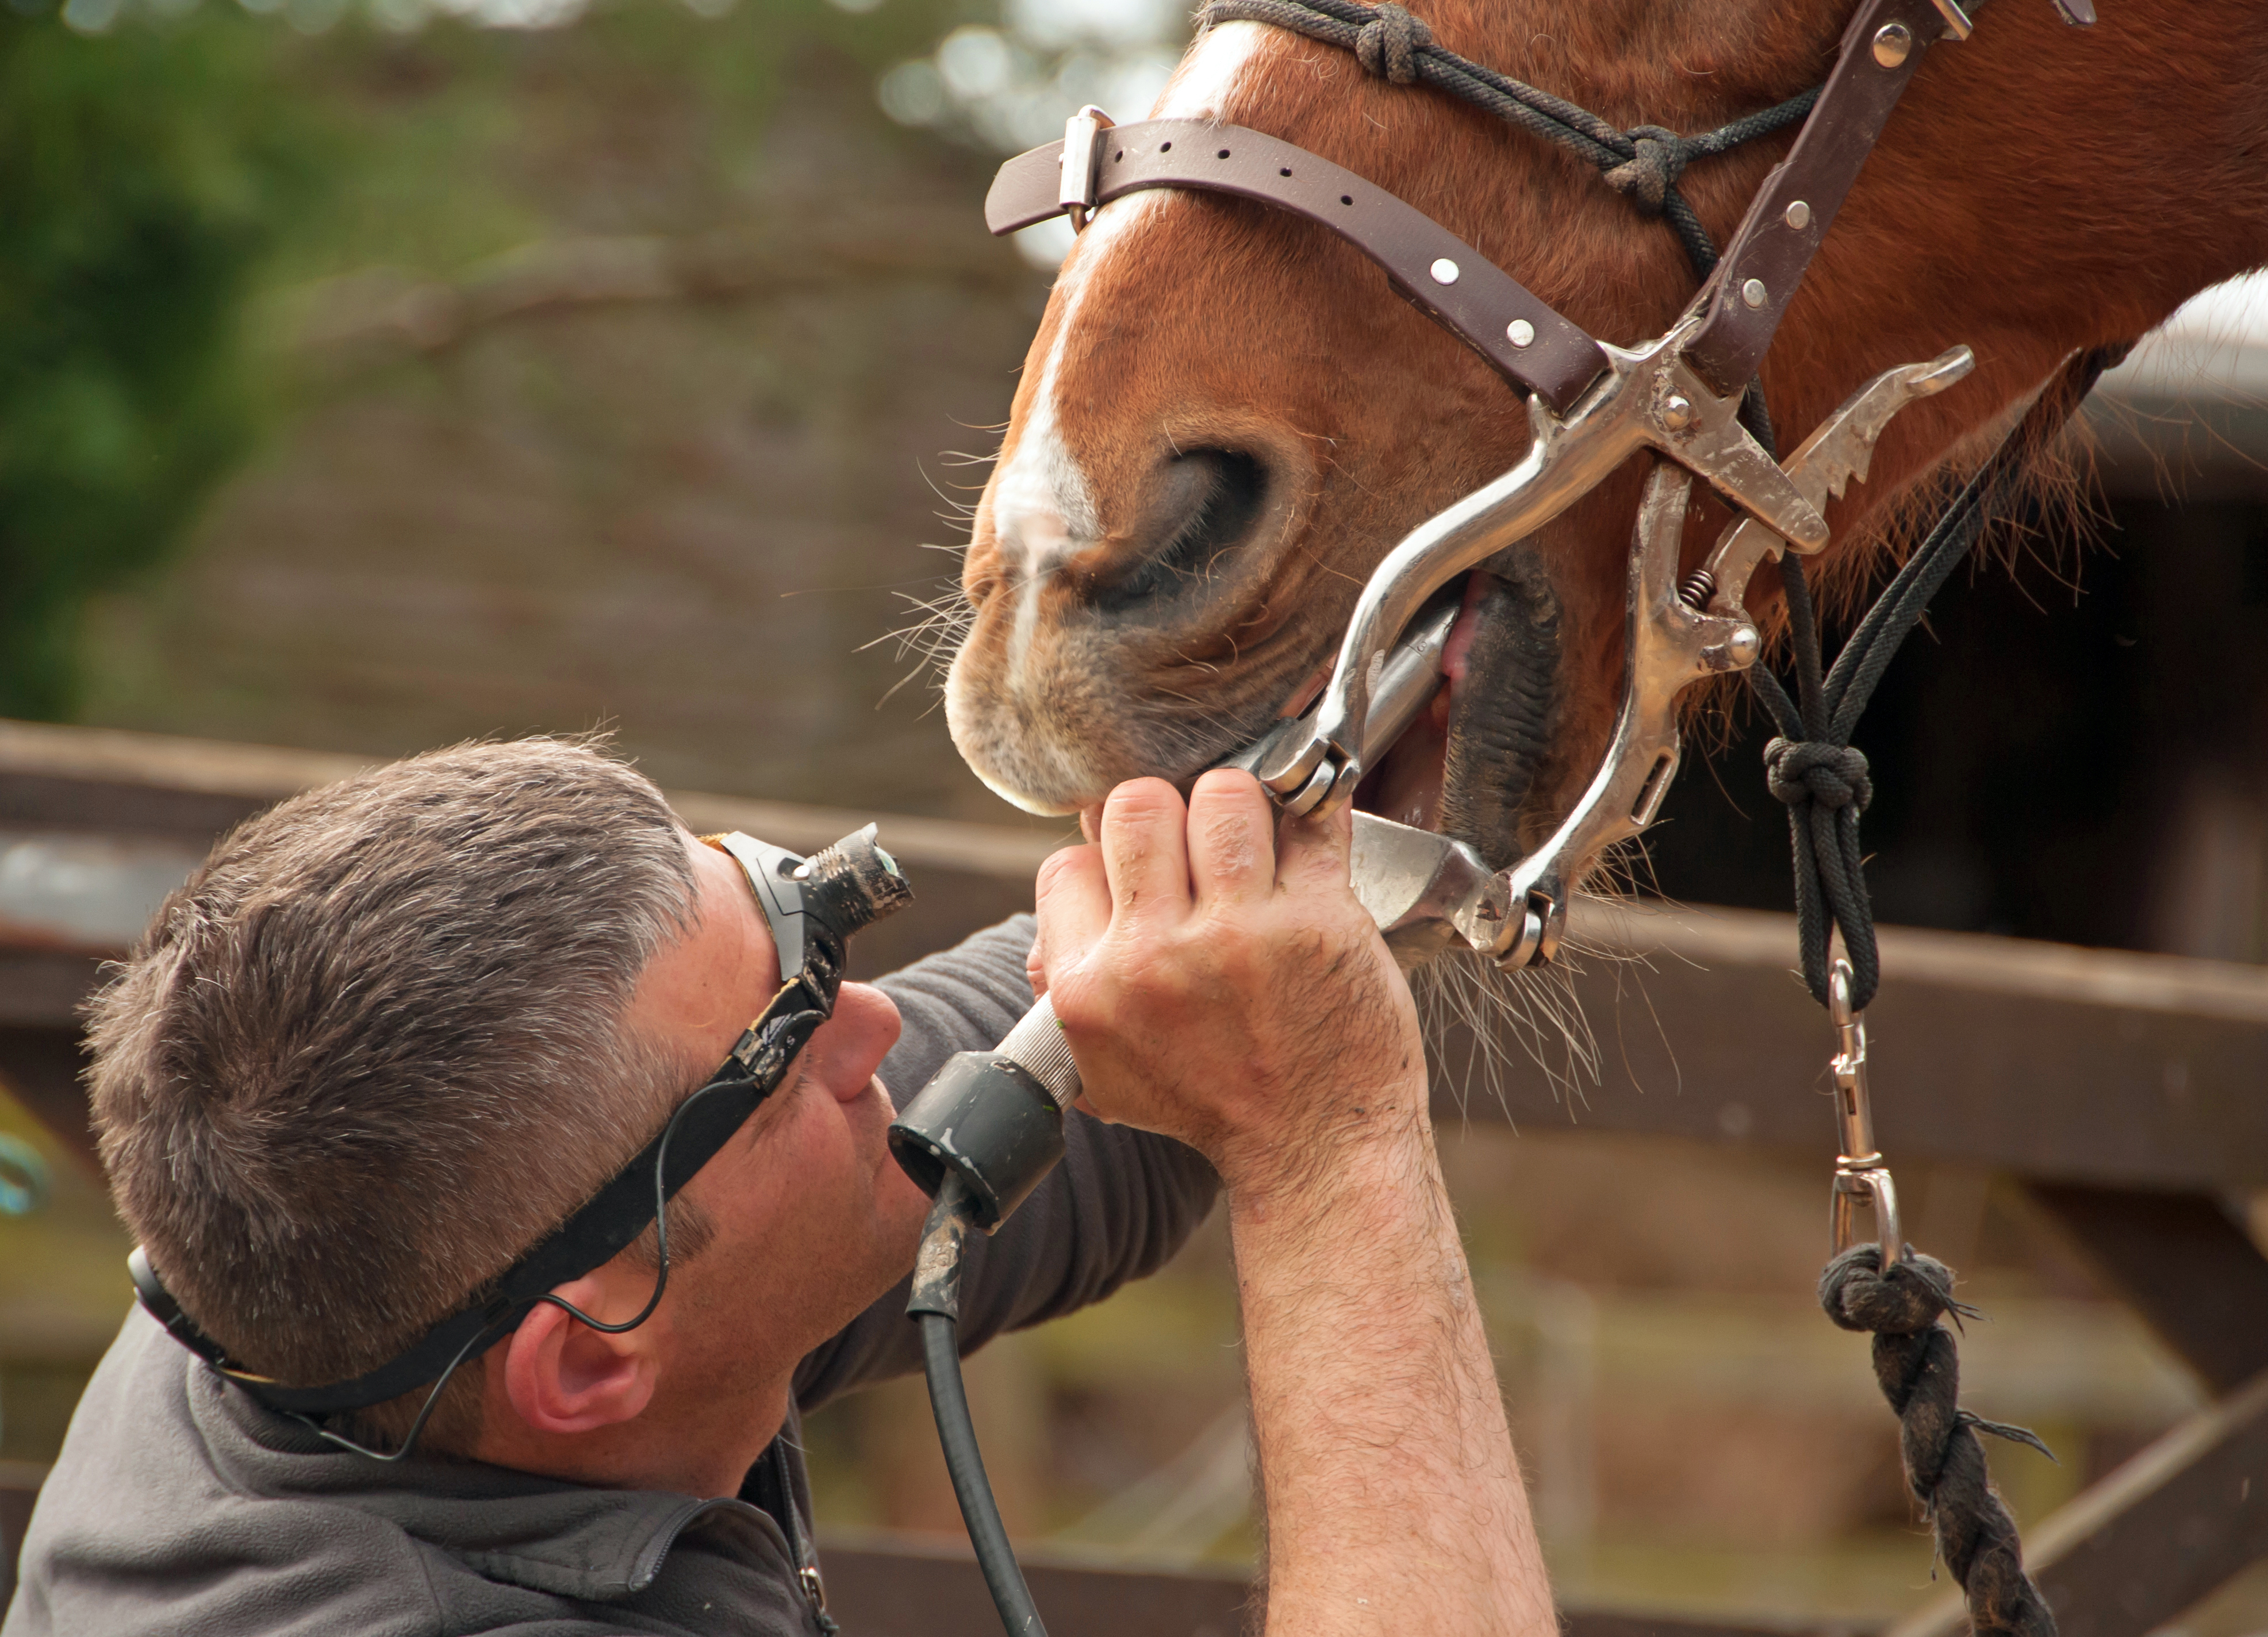 Veterinarian examining a brown and white horse's mouth